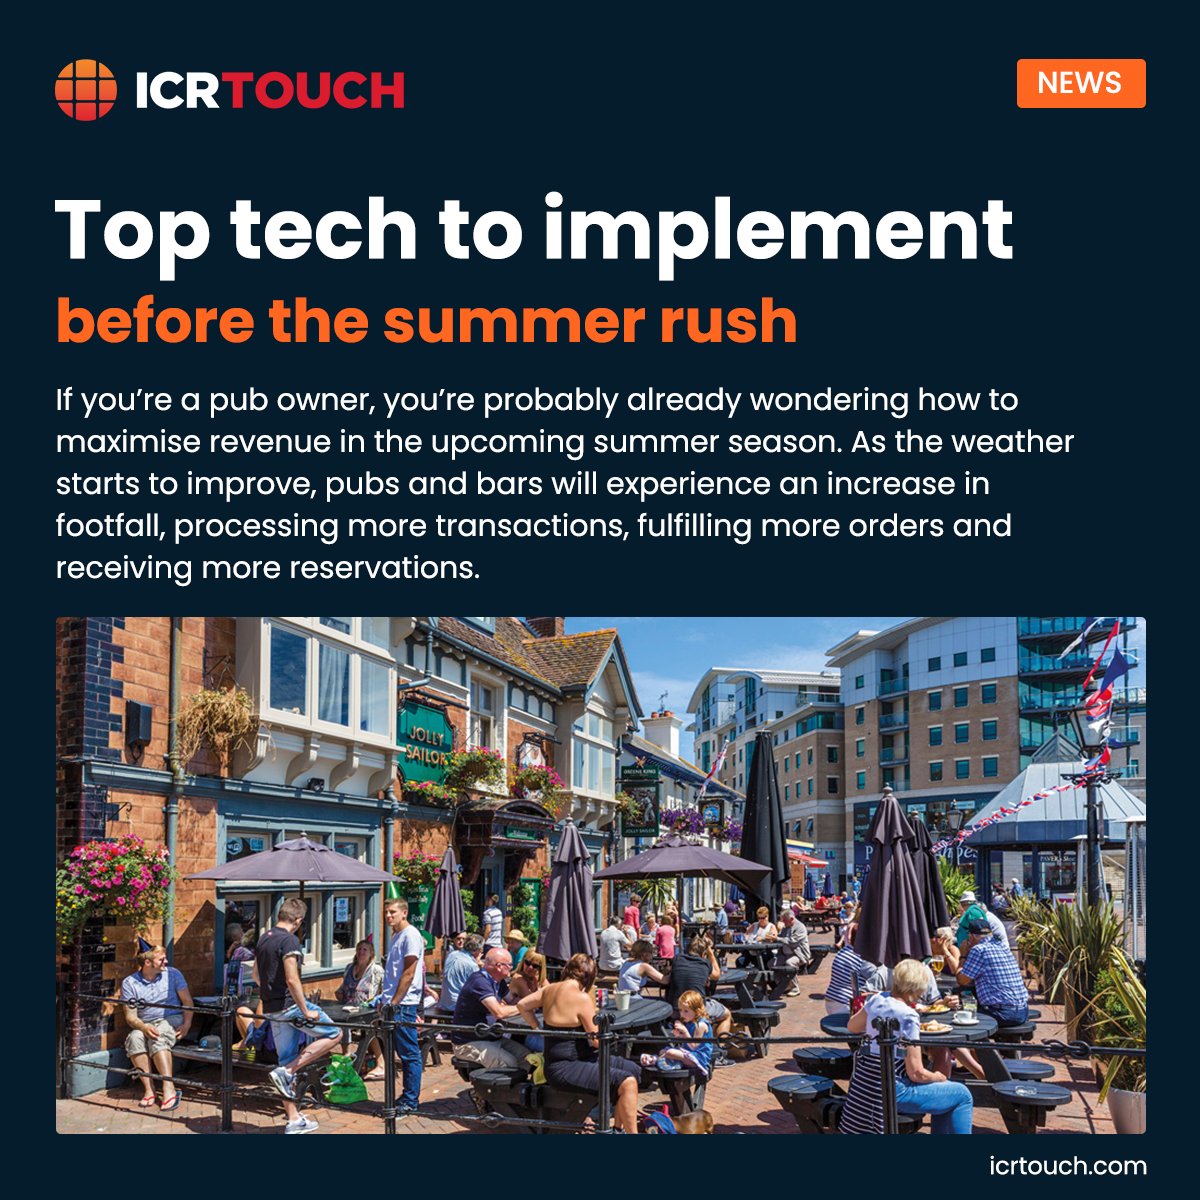 Here are our top 5 EPoS solutions that pub and bar owners should consider implementing before the summer rush for an even more successful season! ☀️

Read the full article here: bit.ly/49F2Ba7

#weareICRTouch #summerrush